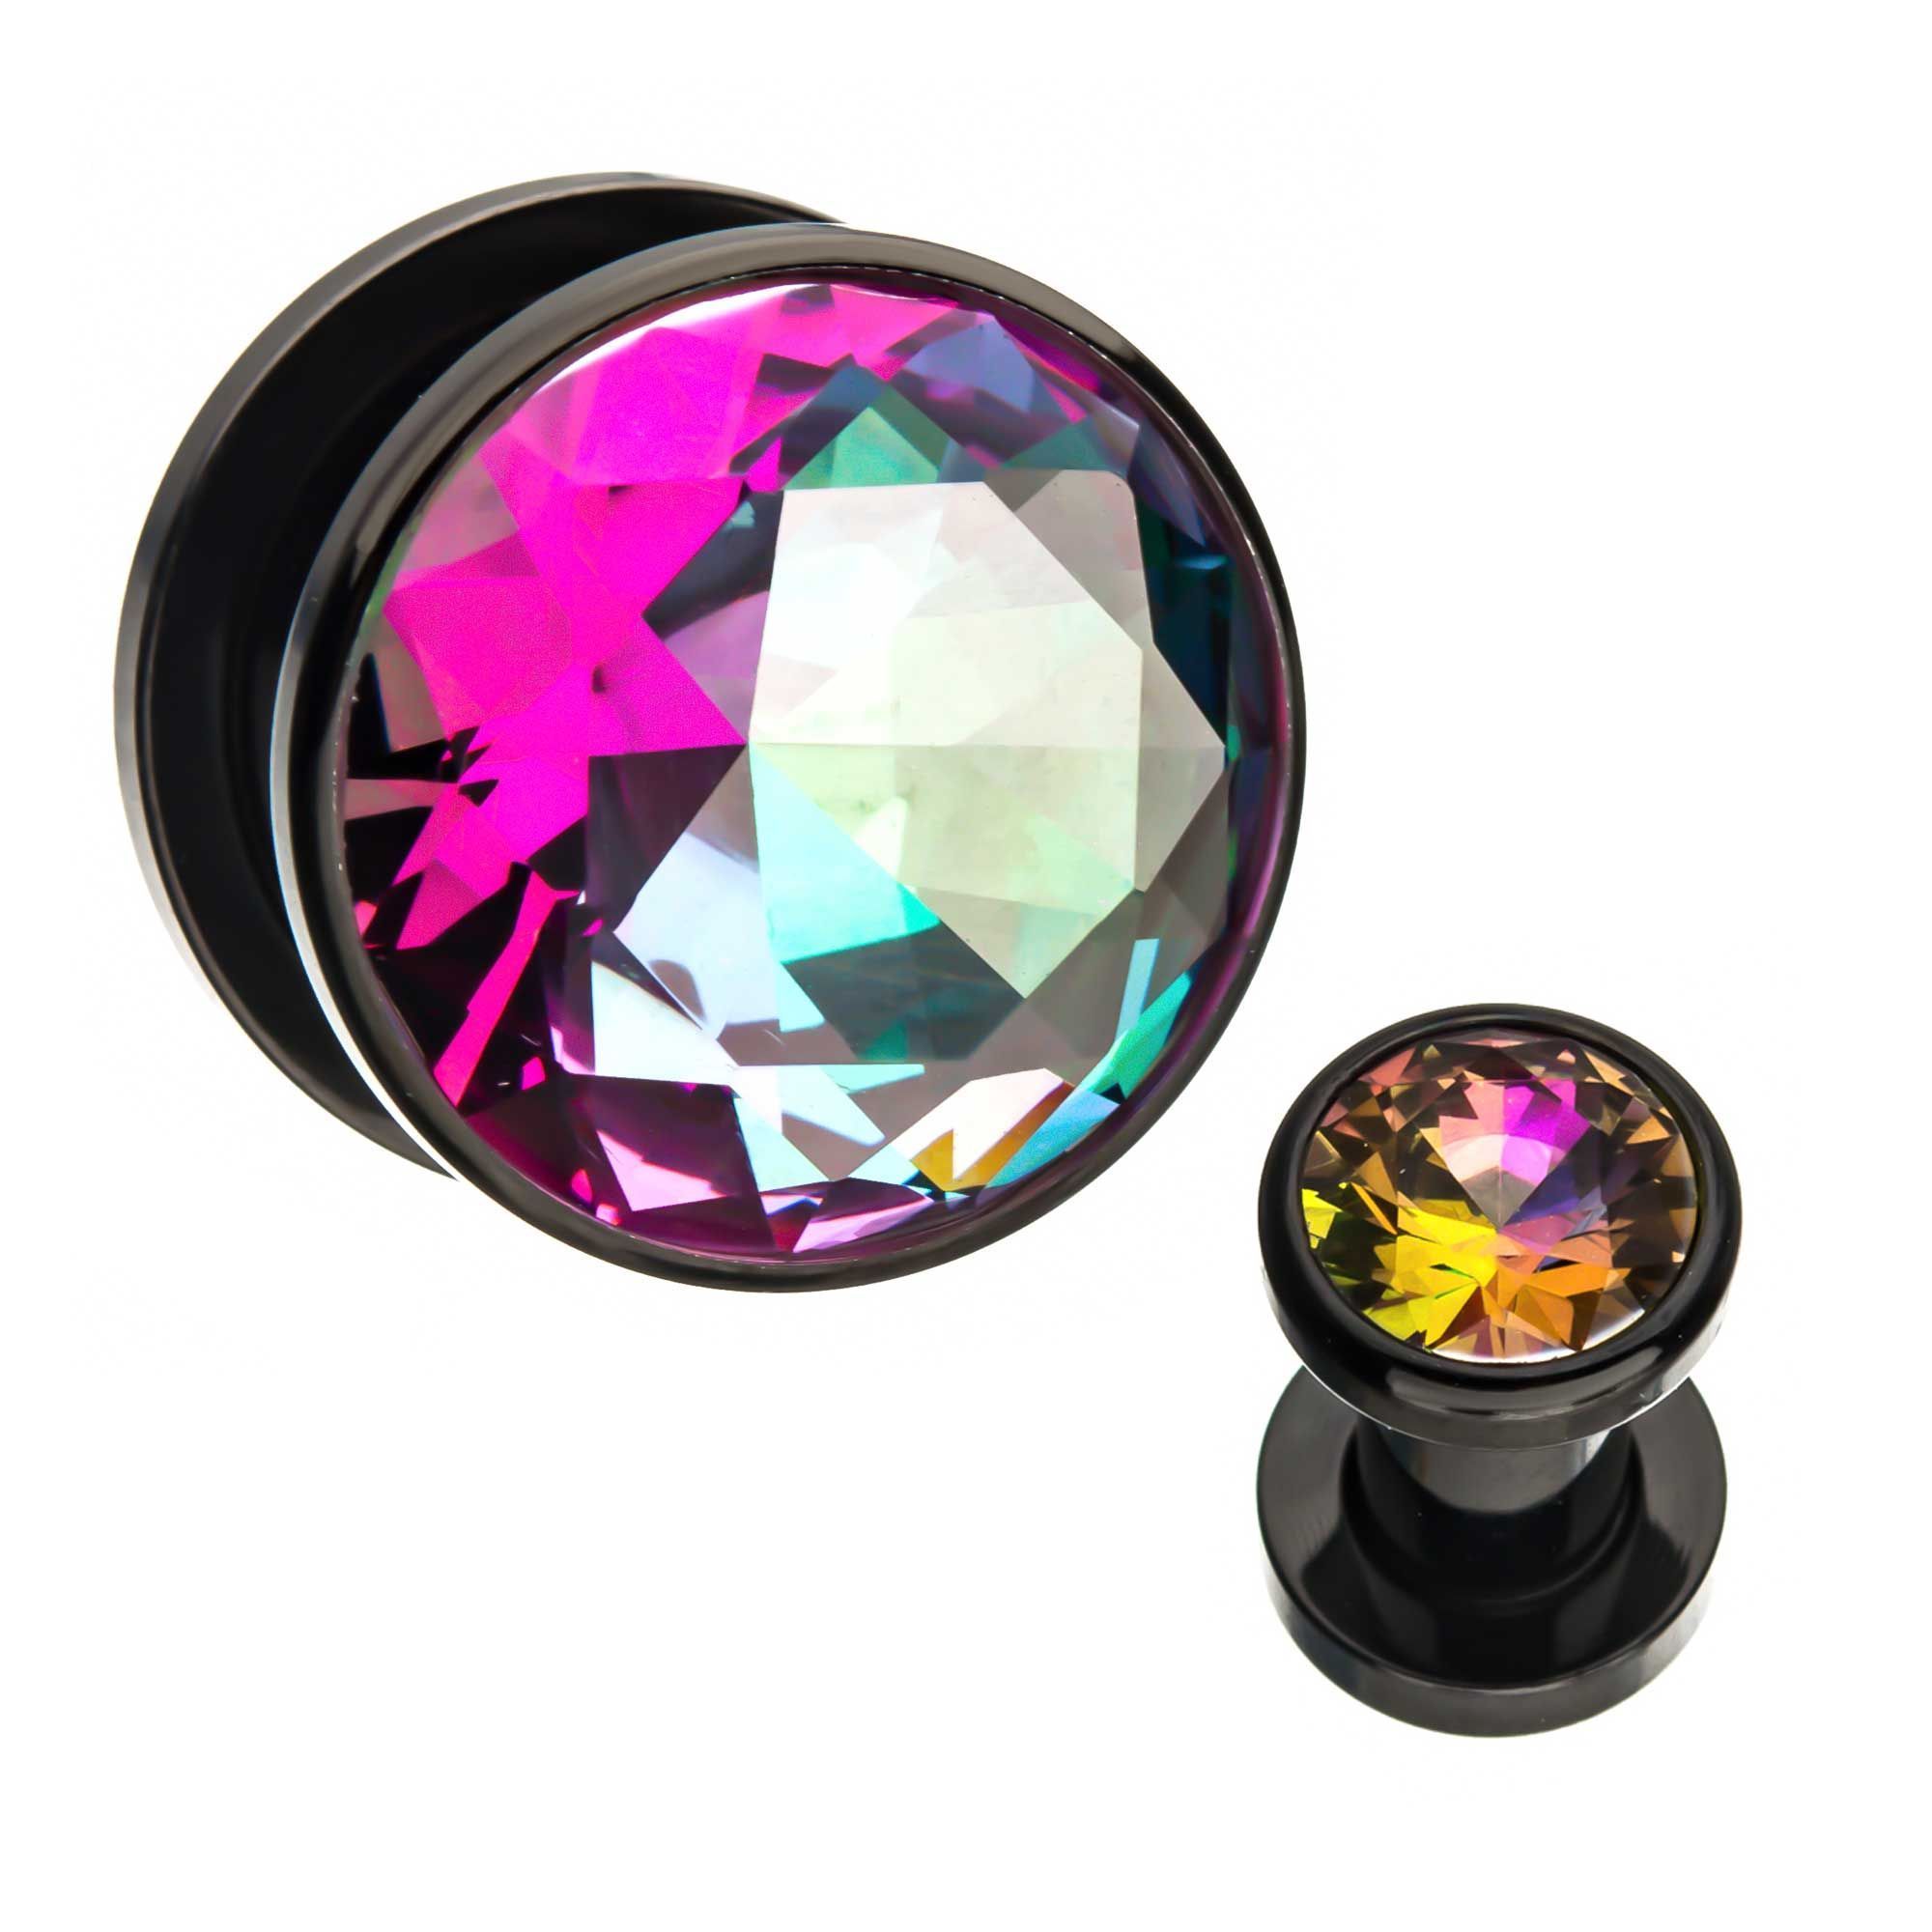 Plugs Earrings - Double Flare Purple and Green CZ Black Plated Screw Fit Plugs - 1 Pair sbvps2836kag -Rebel Bod-RebelBod